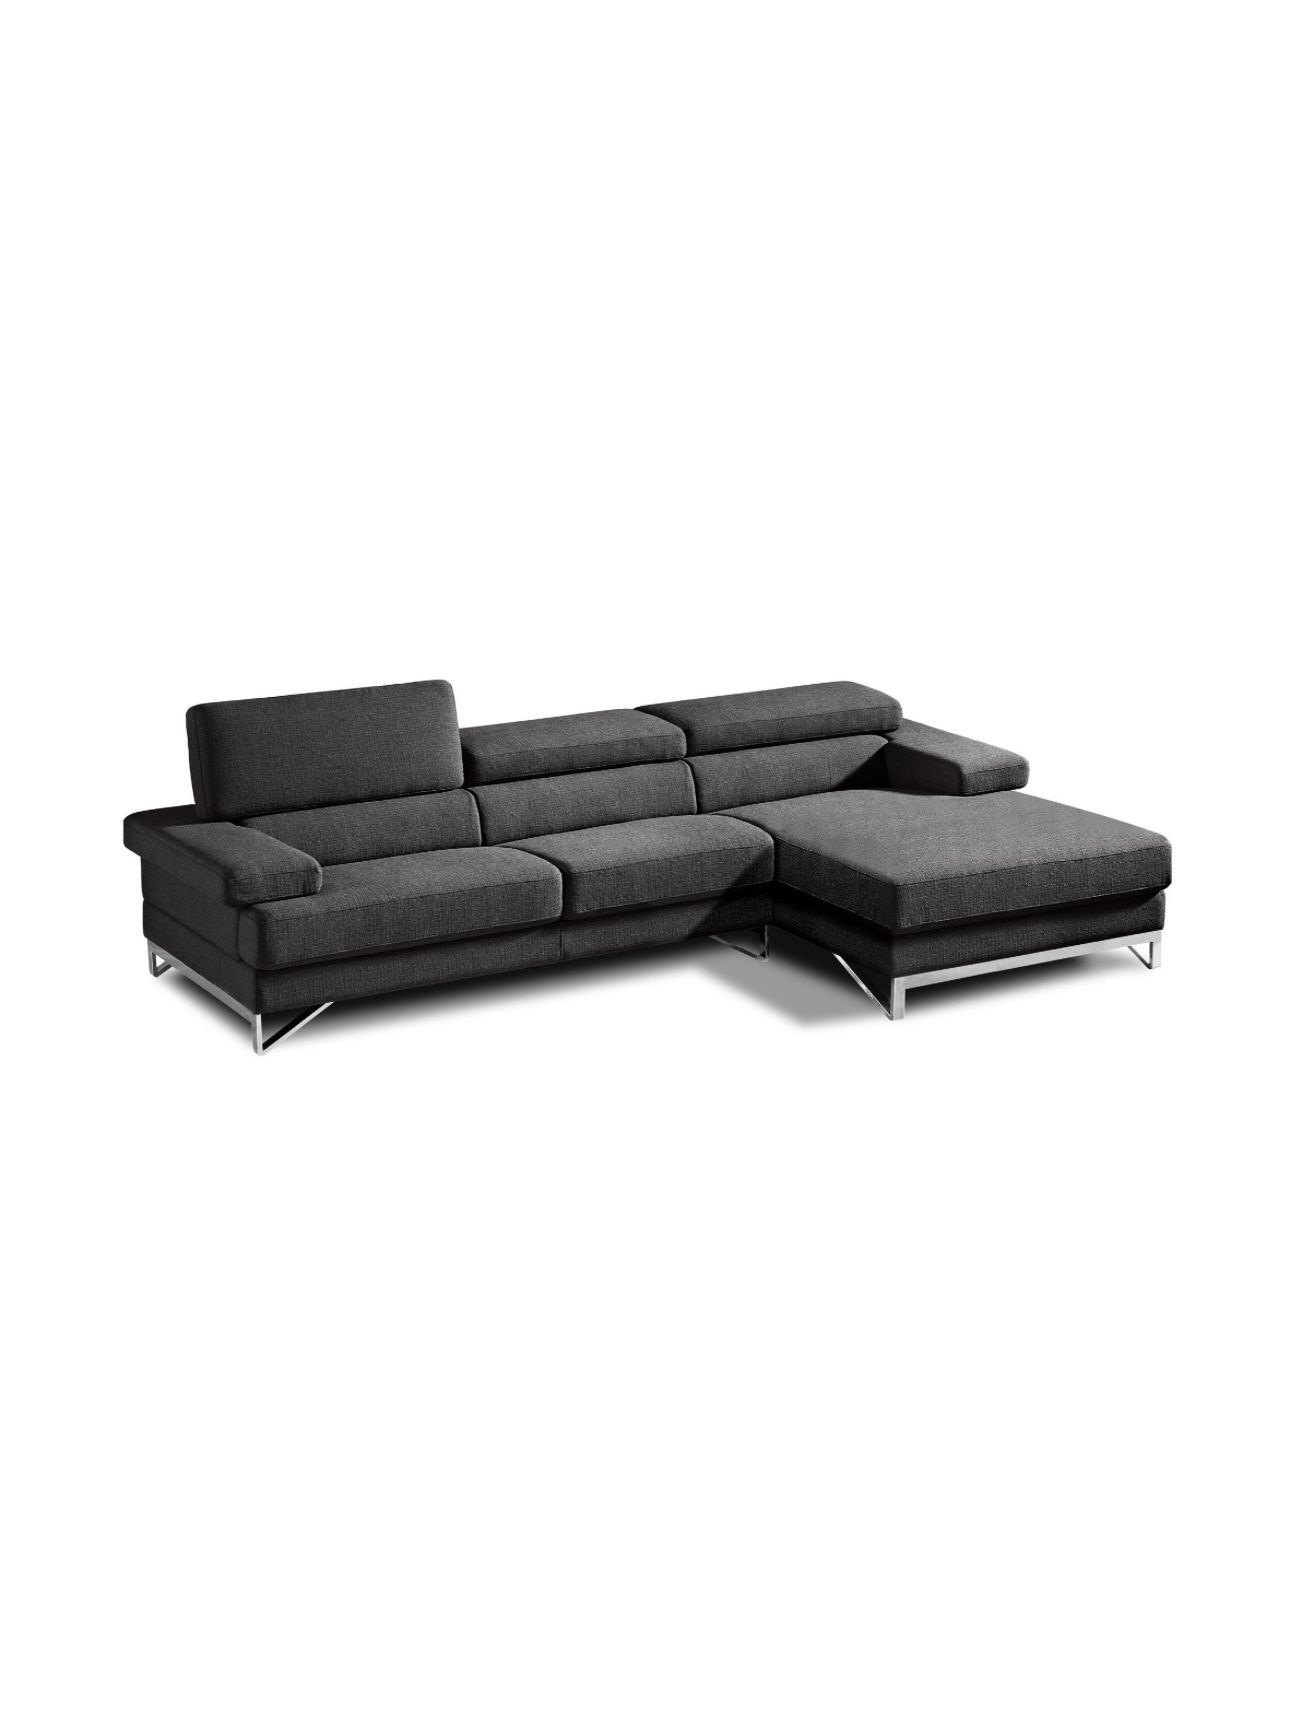 Modern Sectional Sofa Couch